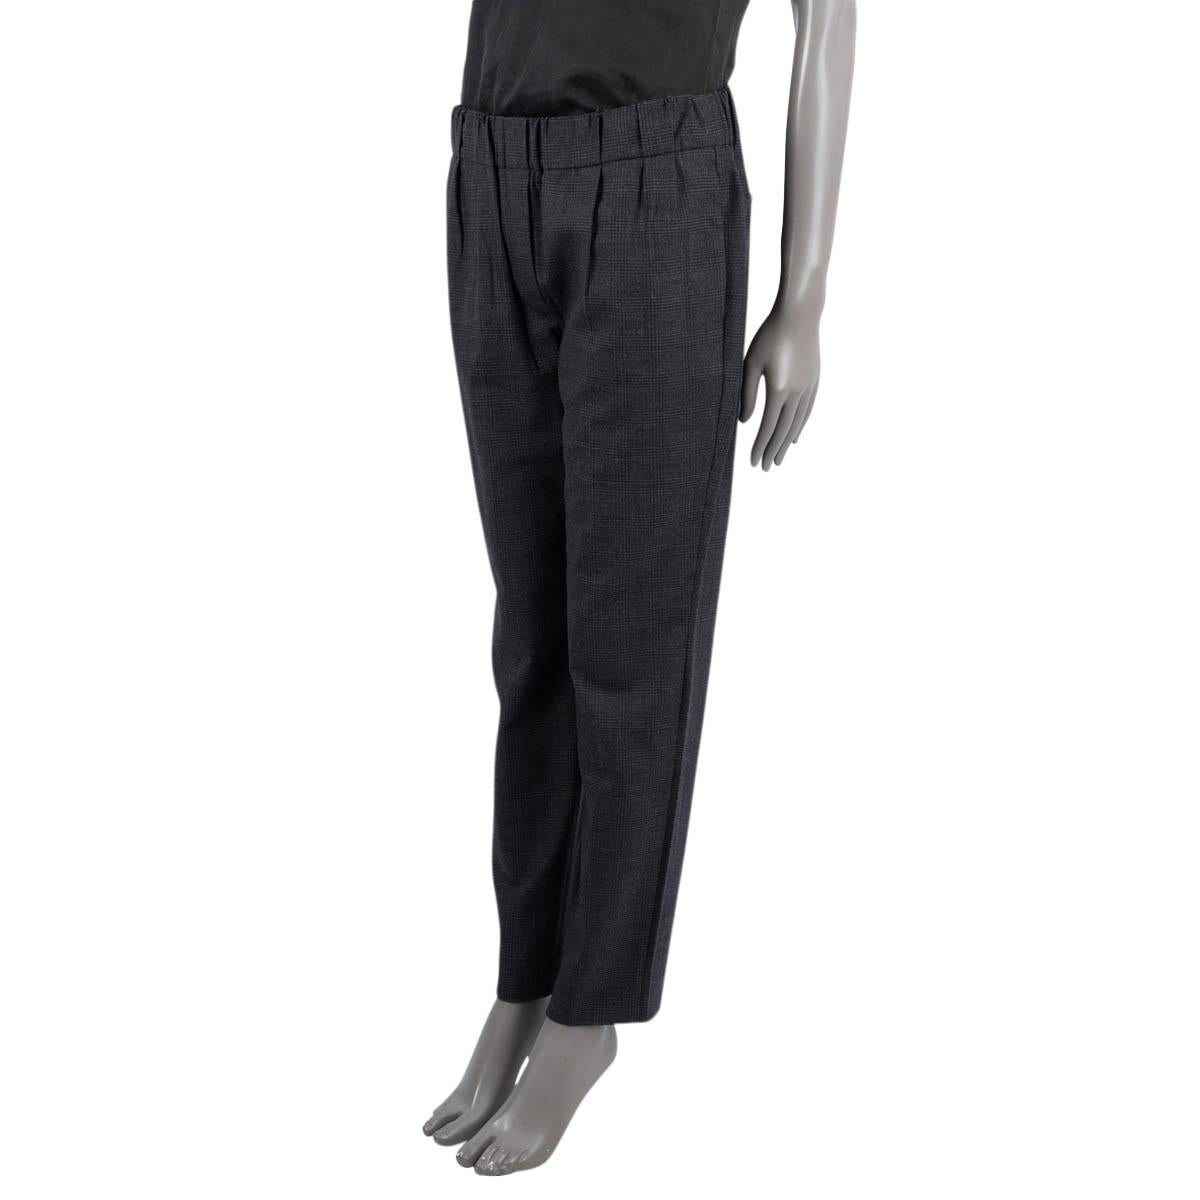 100% authentic Brunello Cucinelli check pants in black and anthracite wool (98%) and elastane (2%) with elastic band at the waist-line and slit pockets on the sides and back. Unlined. Have been worn and are in excellent condition.

Measurements
Tag